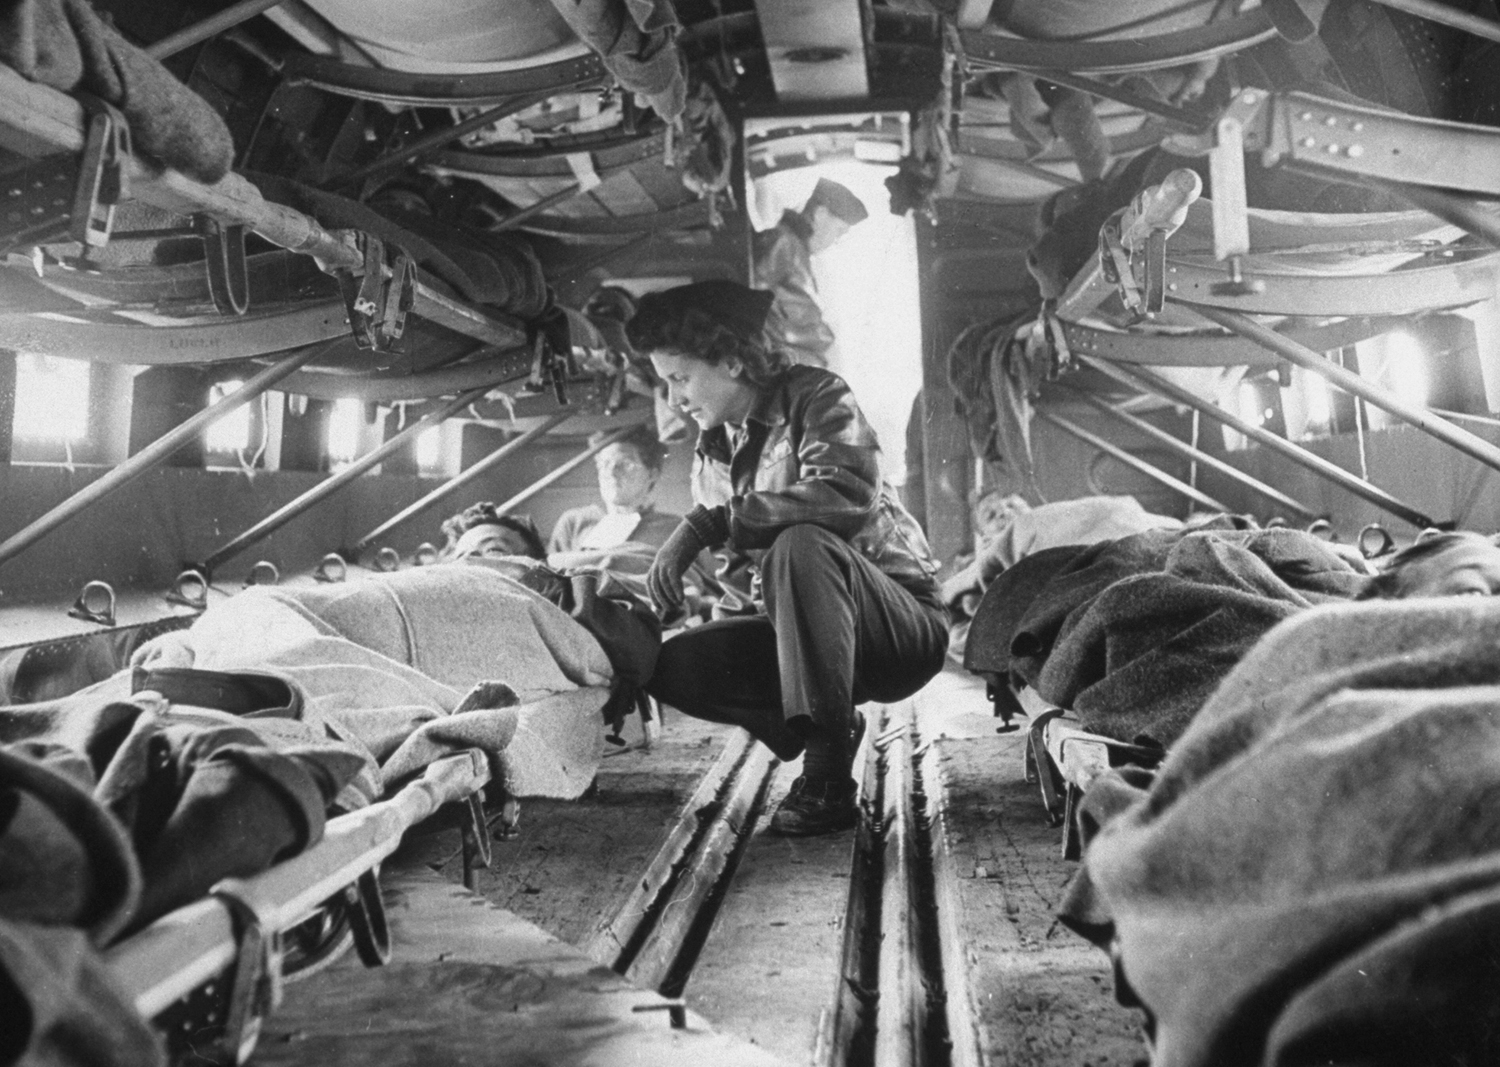 Somewhere over North Africa an American "flying nurse," Second Lieut. Julia Corinne Riley, 23, checks on patients aboard a specially outfitted C-47 transport plane, used to ferry wounded men from the battlefields to hospitals in the rear, spring 1943.